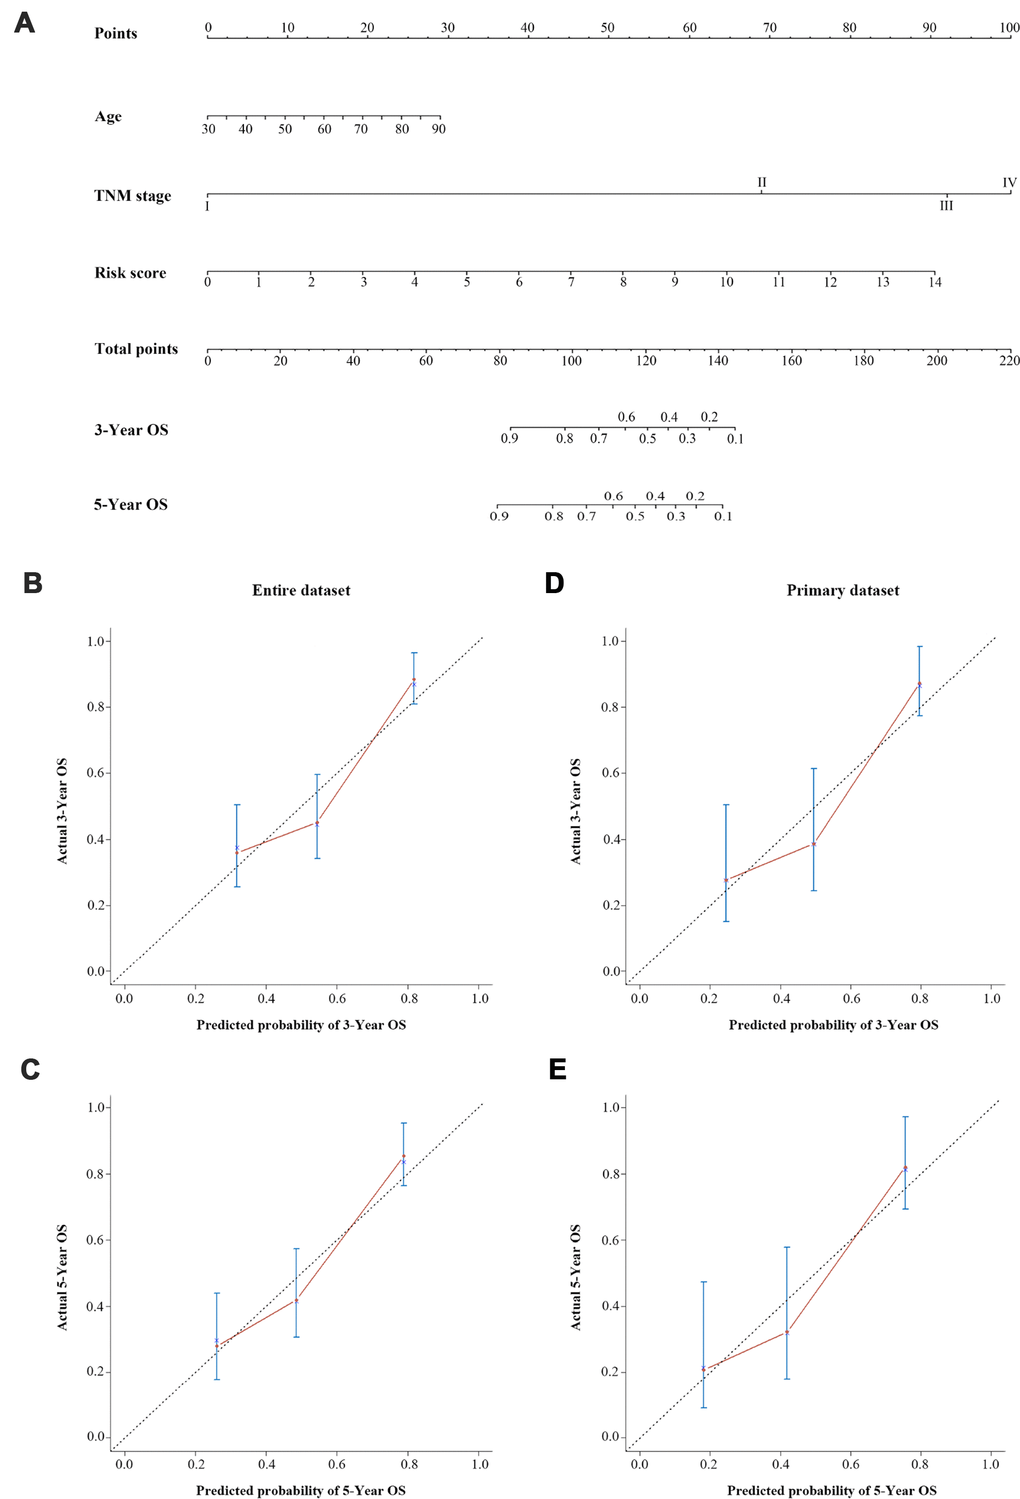 A three-lncRNA signature-based nomogram to predict three- and five-year OS in bladder cancer patients. (A) Nomogram for predicting OS. Instructions: Locate each characteristic on the corresponding variable axis, and draw a vertical line upwards to the points axis to determine the specific point value. Repeat this process. Tally up the total points value and locate it on the total points axis. Draw a vertical line down to the three- or five-year OS to obtain the survival probability for a specific bladder cancer patient. (B–E) Calibration plots of the nomogram for predicting OS at three years (B) and five years (C) in the entire dataset, and at three years (D) and five years (E) in the primary dataset. The 45-degree dotted line represents a perfect prediction, and the red lines represent the predictive performance of the nomogram.